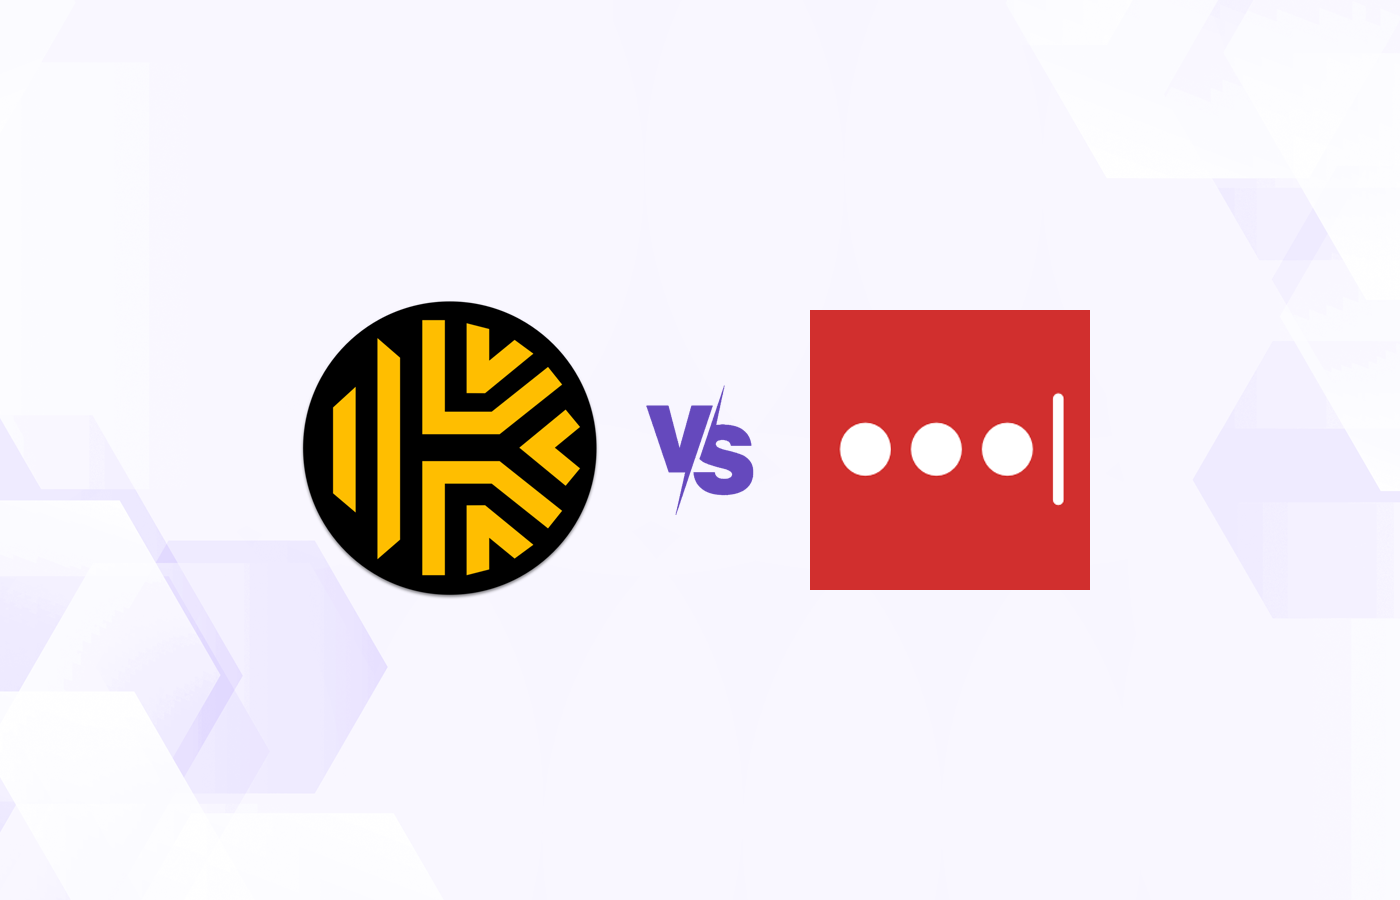 Versus graphic featuring the logos of Keeper and LastPass.